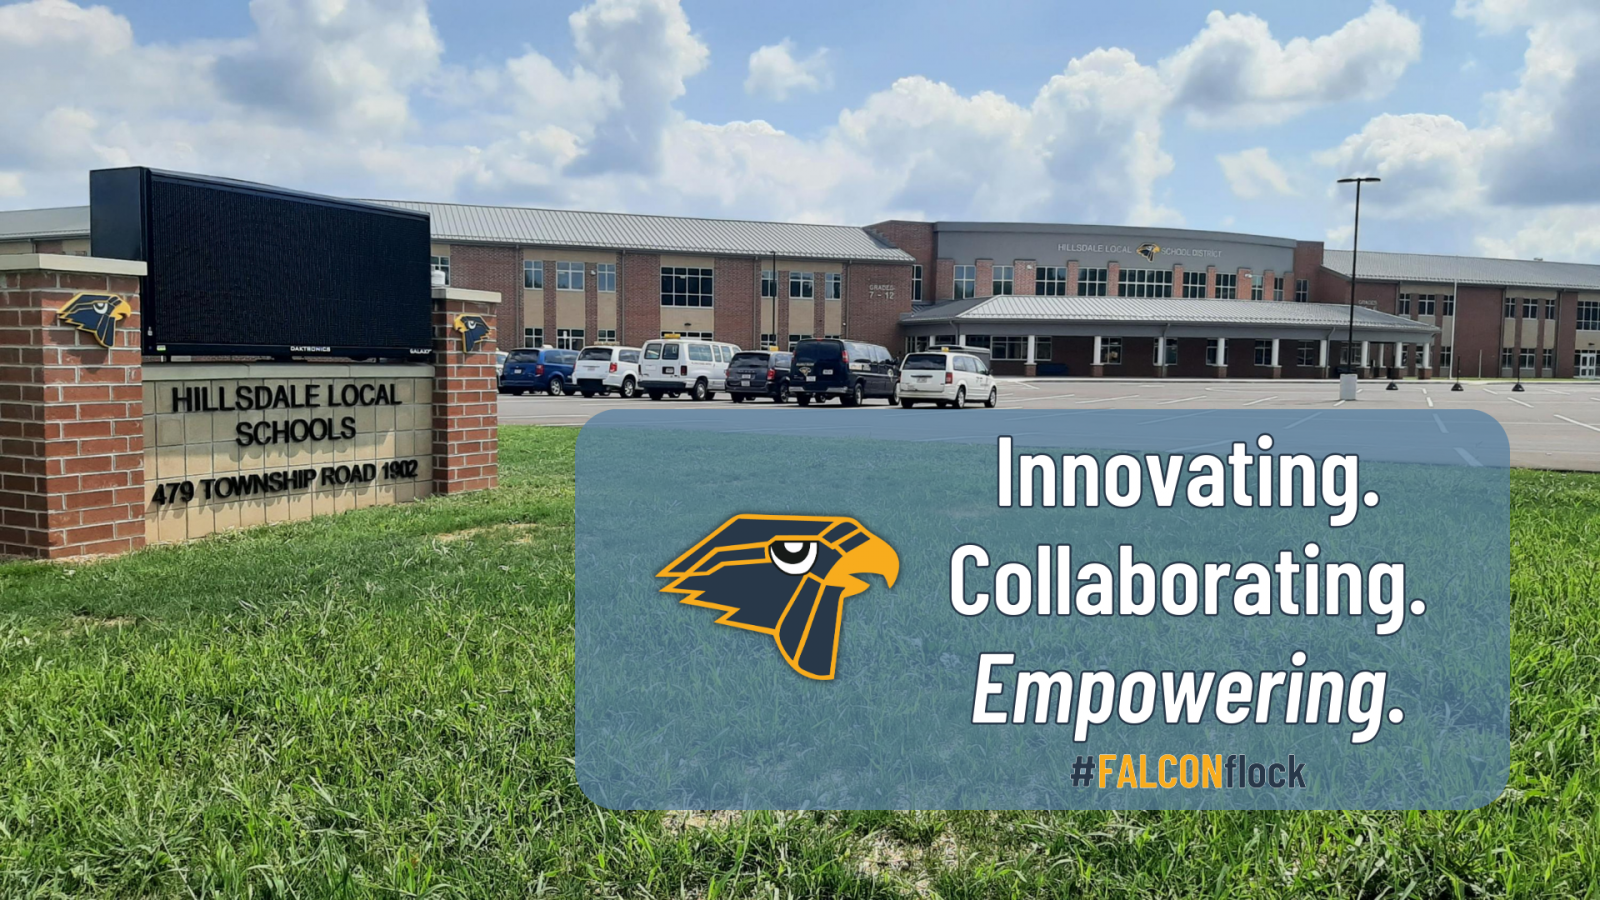 A picture of the front of the school. Text: Innovating. Collaborating. Empowering.